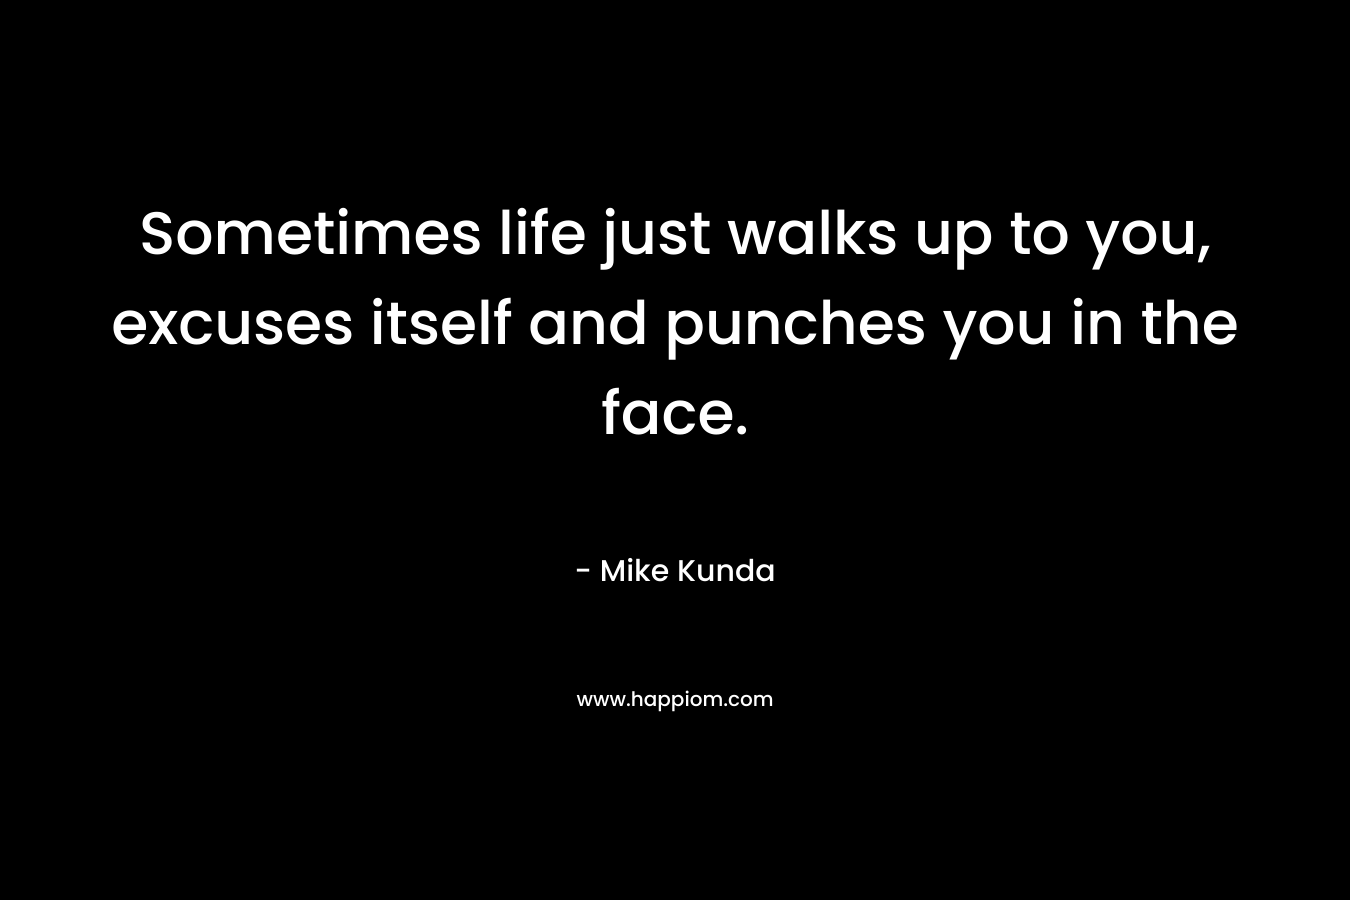 Sometimes life just walks up to you, excuses itself and punches you in the face. – Mike Kunda